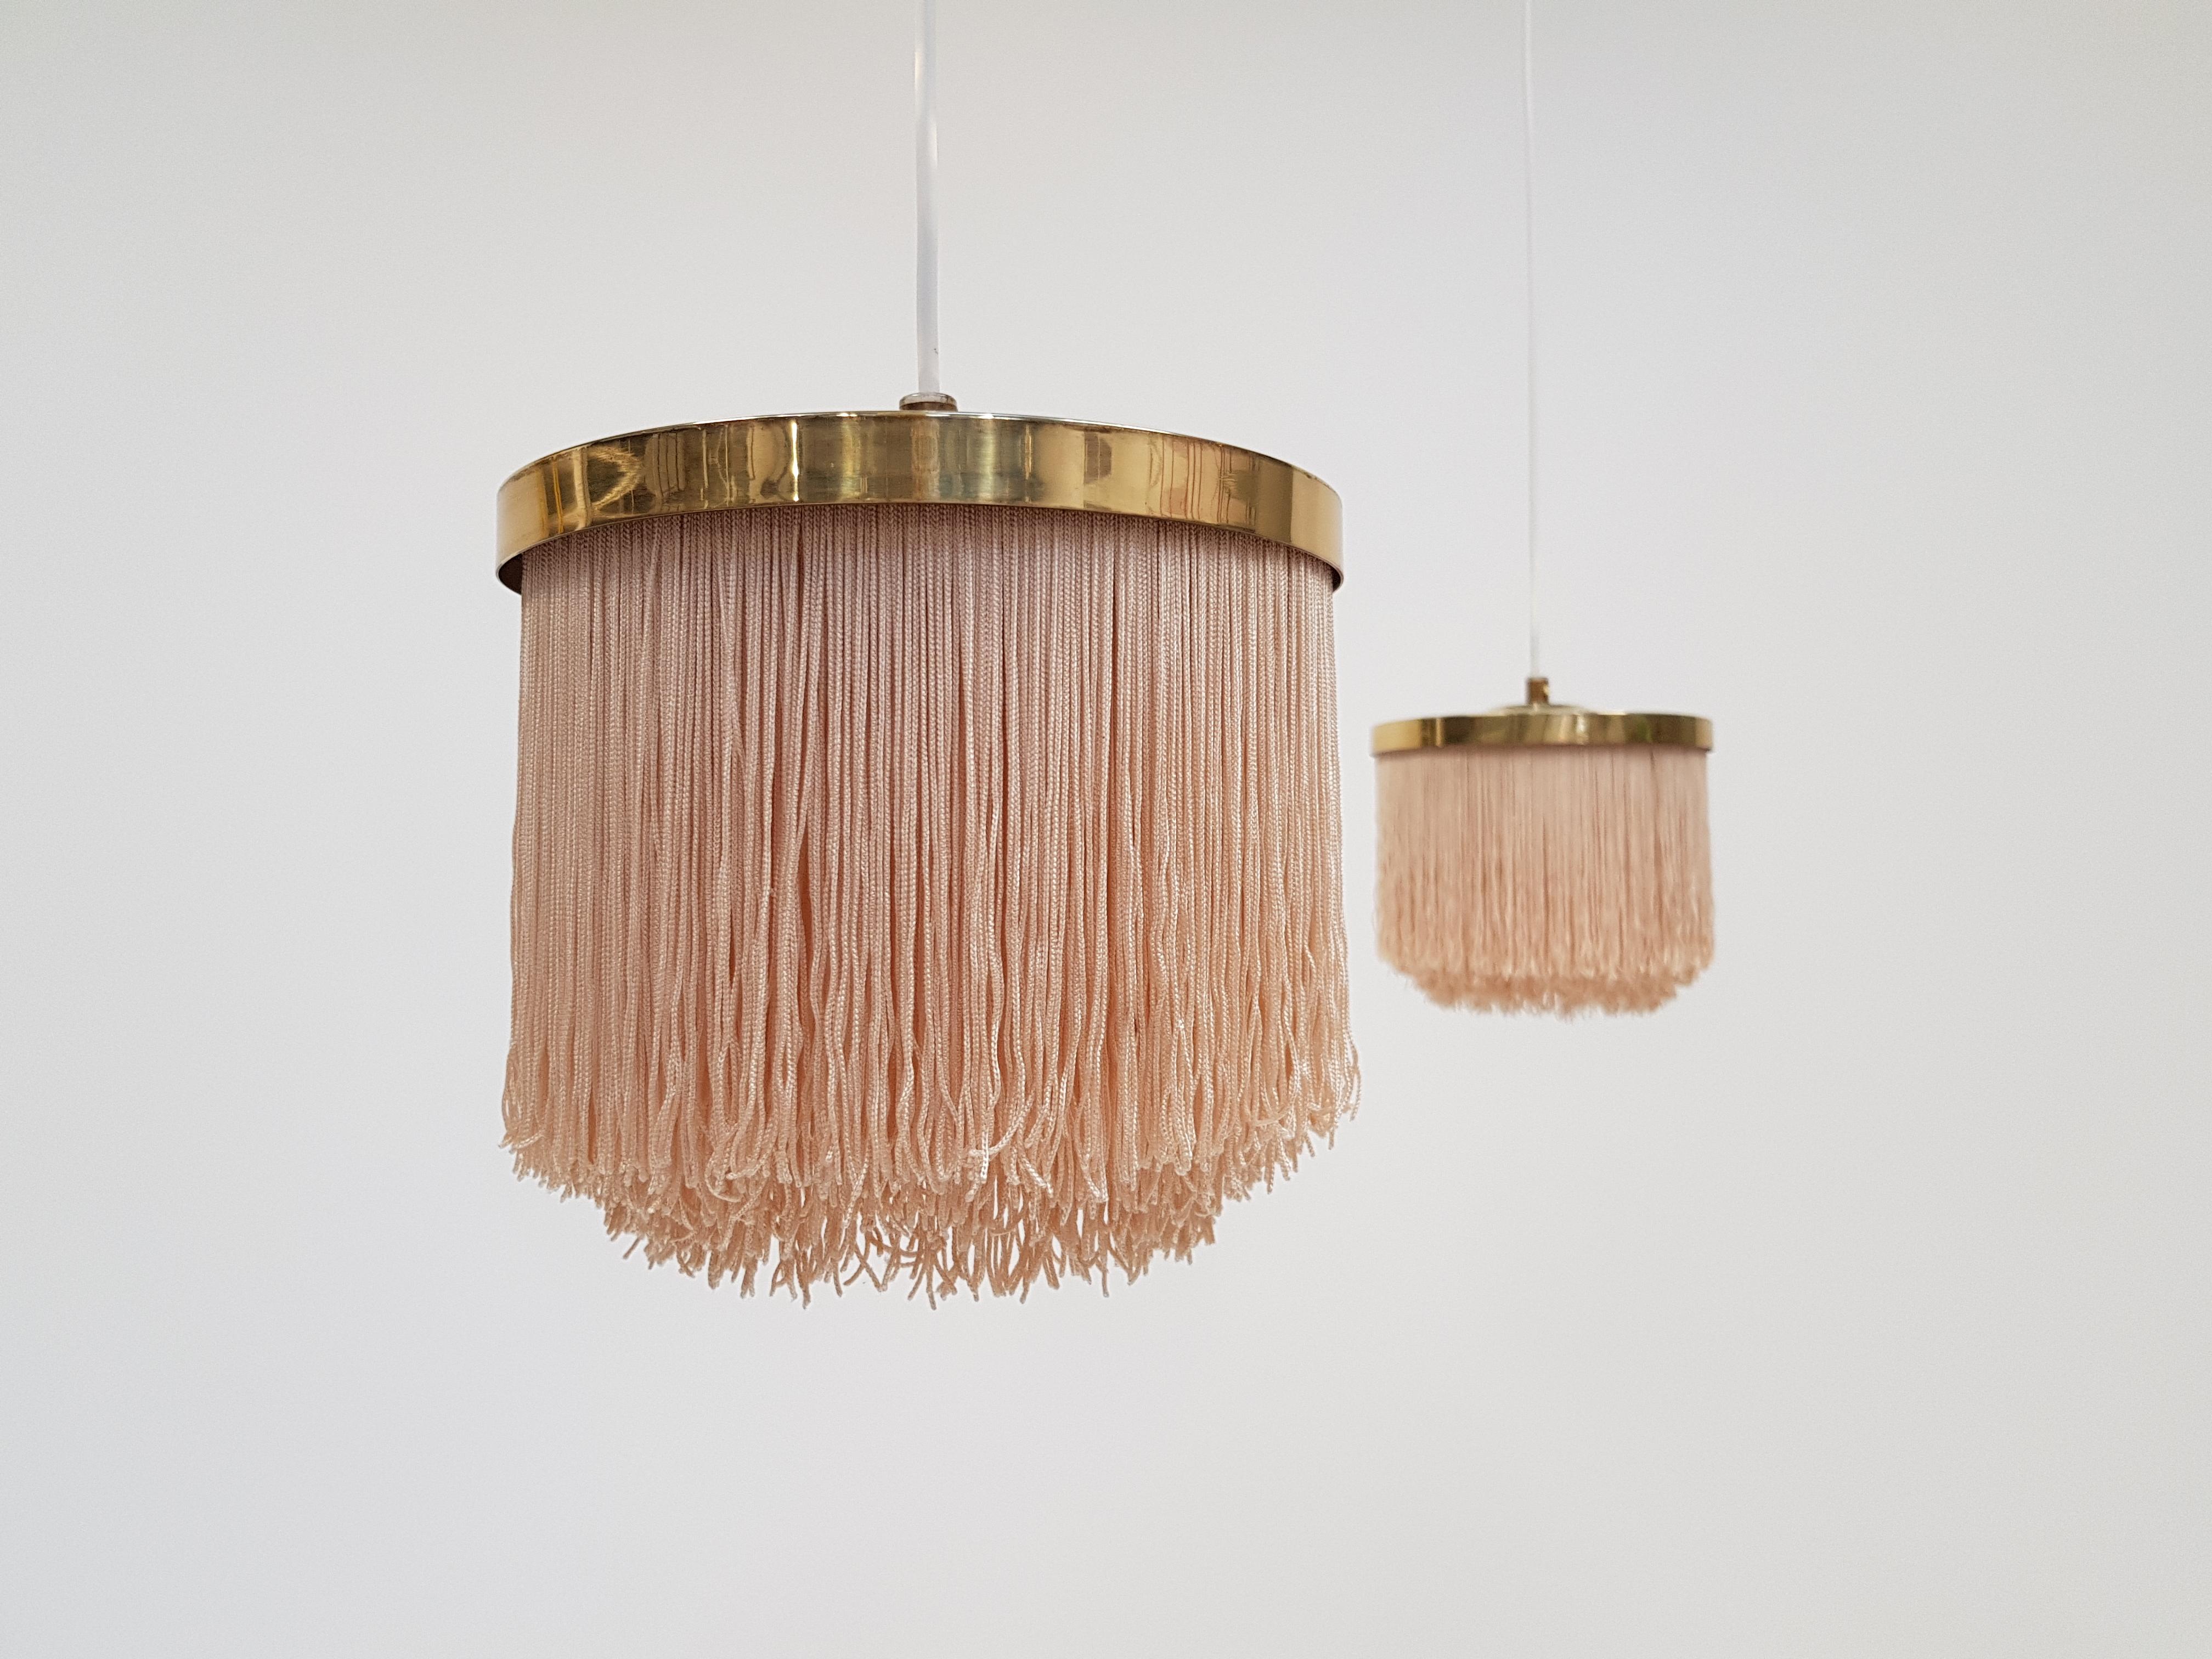 A pair of Hans-Agne Jakobsson for Markaryd taupe-colored silk fringed pendants with brass frame, dating from the 1960s and manufactured in Sweden.
 
Fully working, rewired, safety tested and passed - E27 / E26 Edison screw fitting.

Will